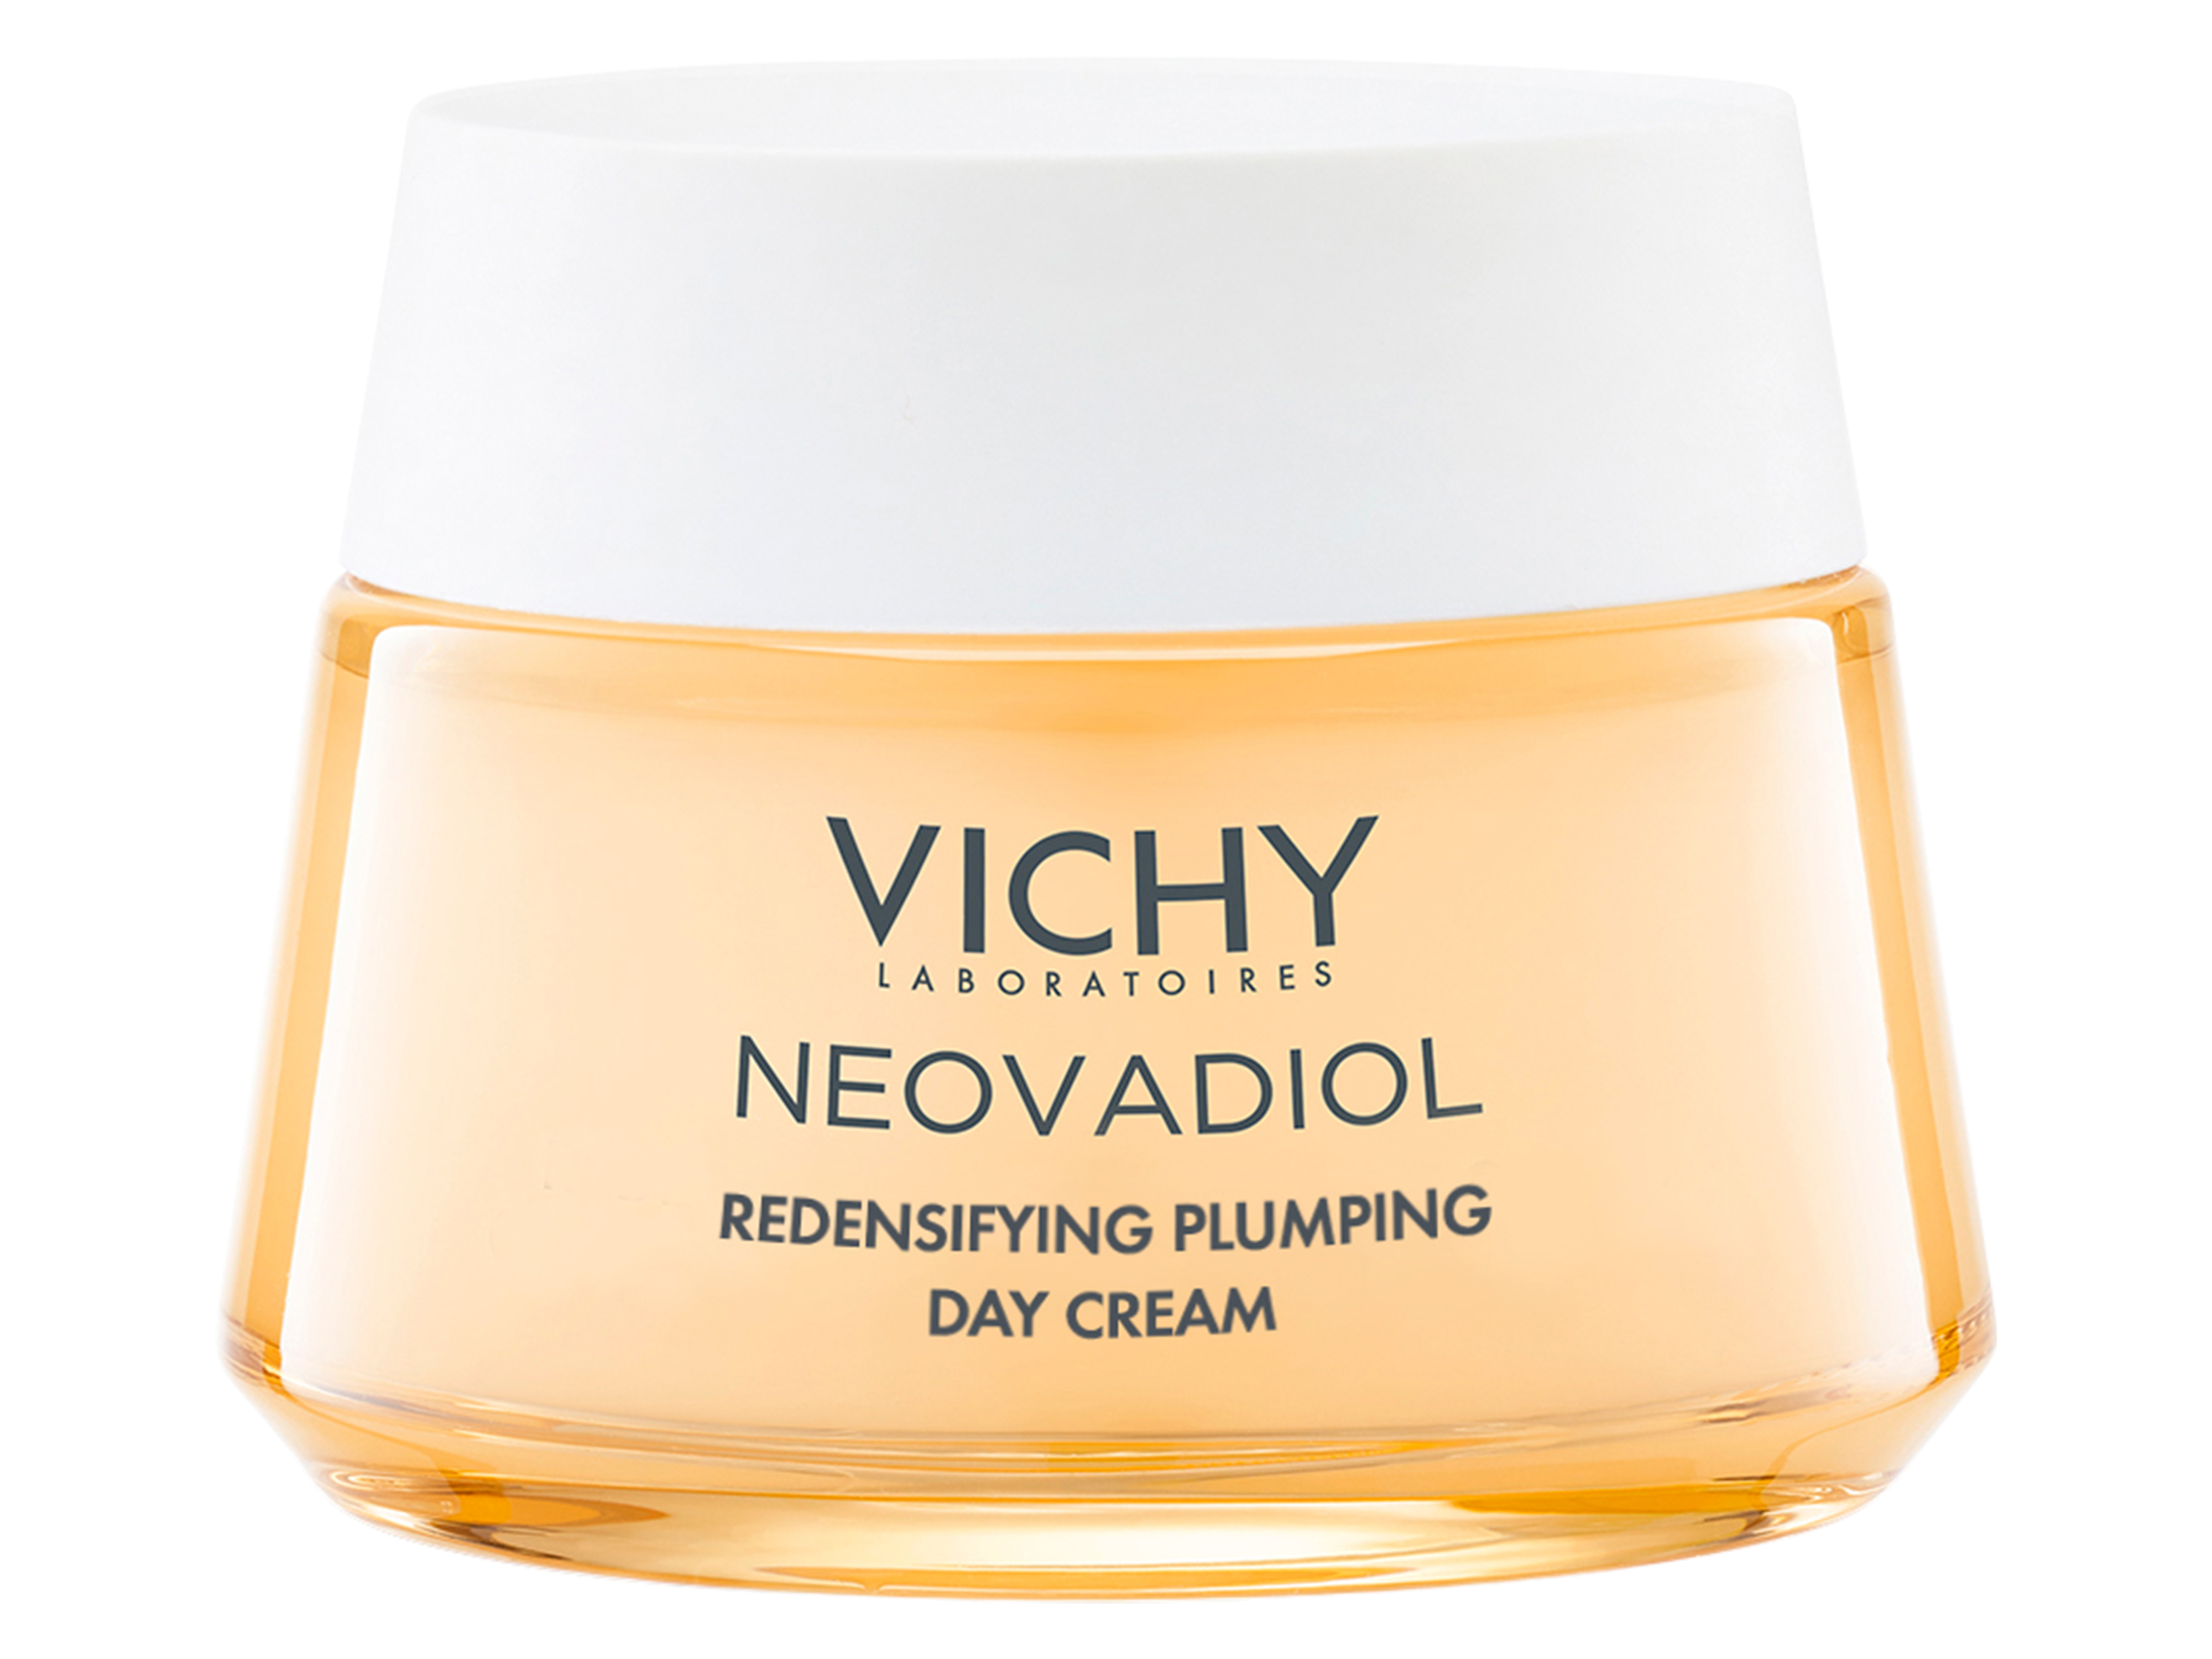 Vichy Neovadiol Redensifying Plumping Day Cream, Tørr hud, 50 ml